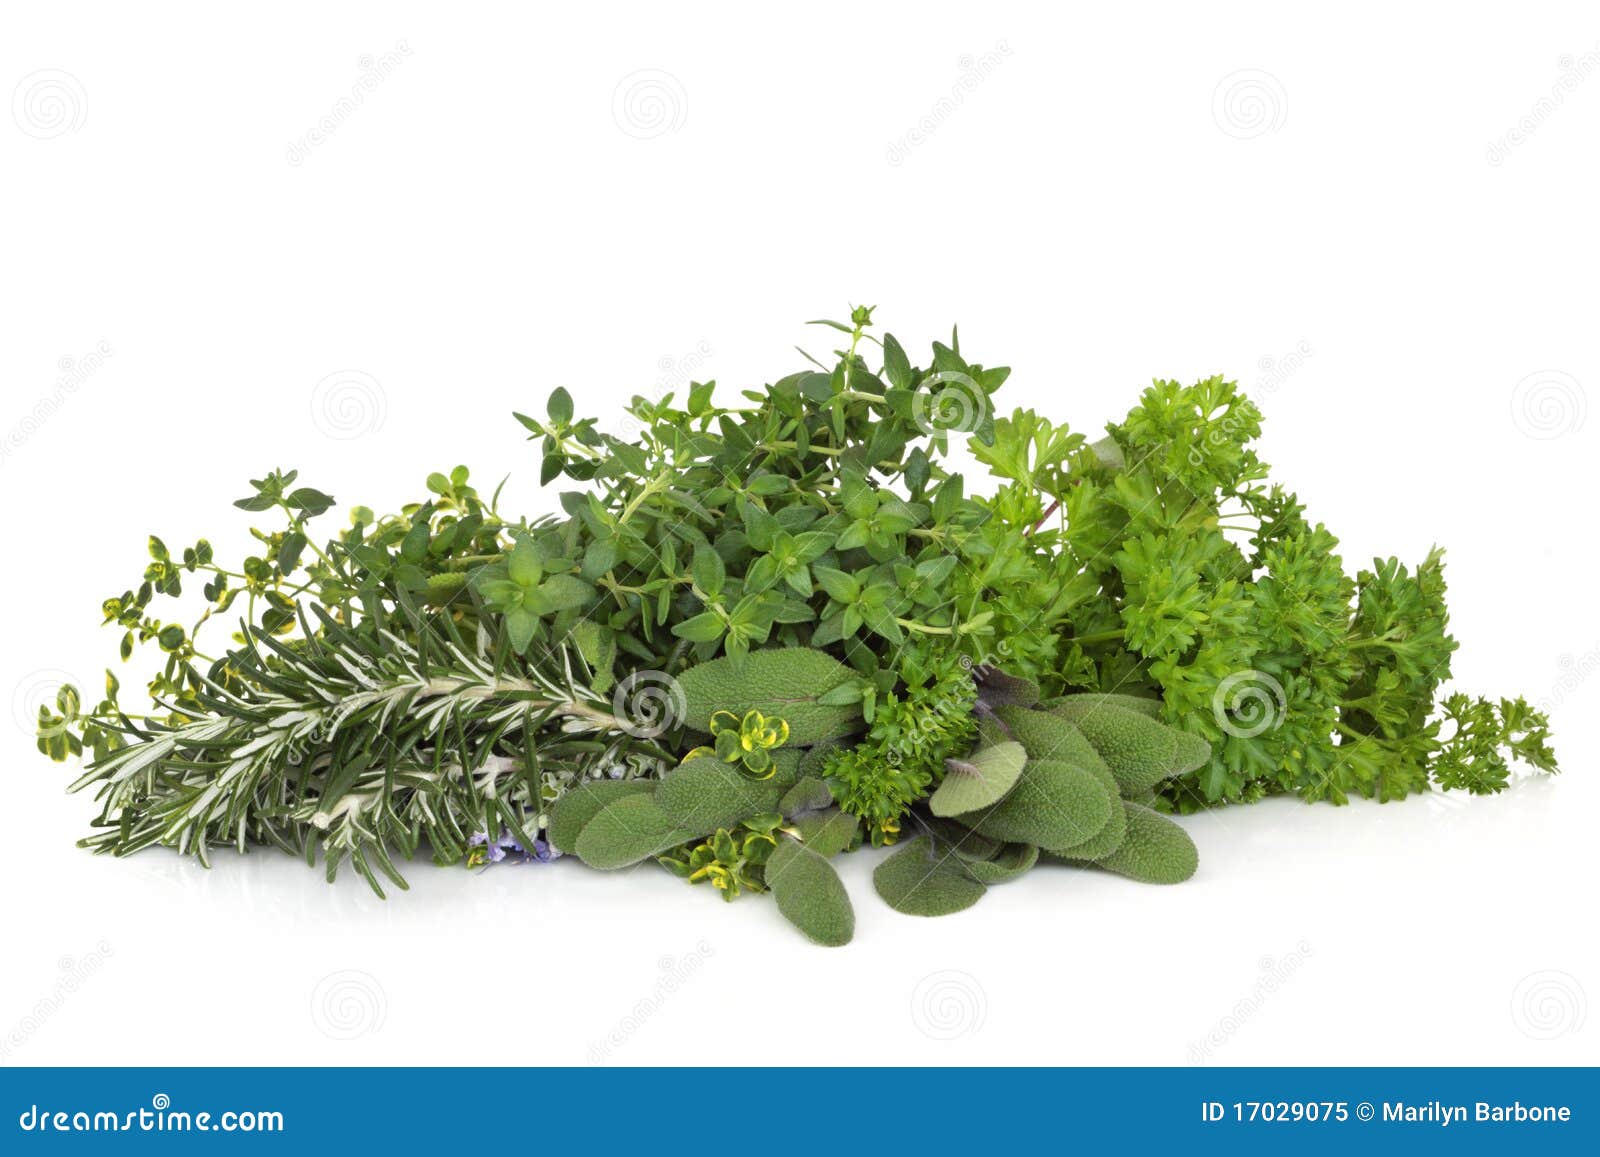 Rosemary Sage Parsley and Thyme - The Peppermill